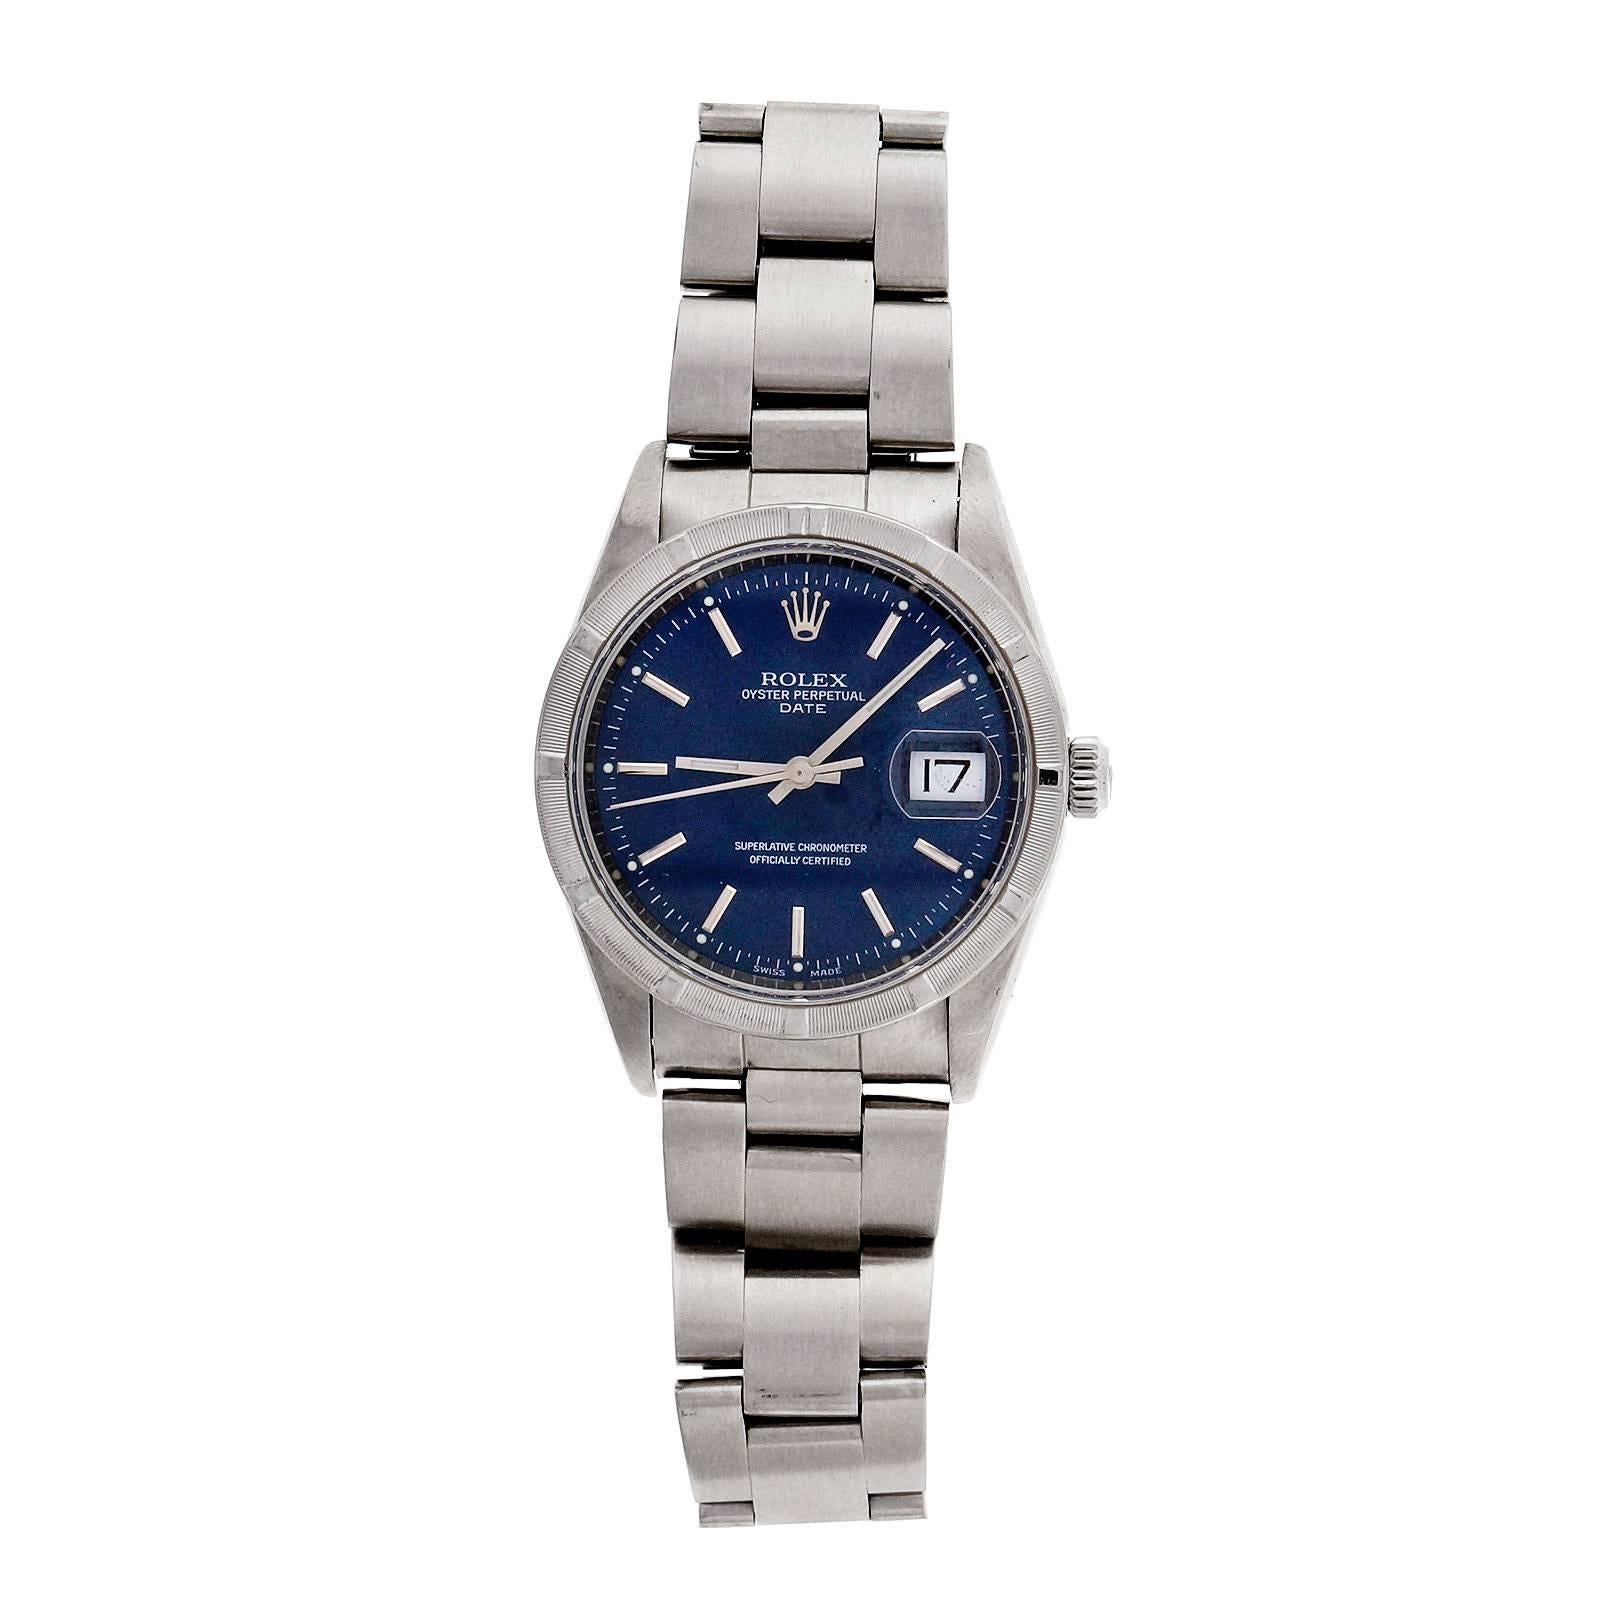 1999 Rolex Oyster Perpetual Date with factory original blue dial and oyster band.

Steel
93.1 grams
Length: 7.5 to 7.75 inches
Length: 42mm
Width: 34.4mm
Band width at case: 14mm
Case thickness: 12.1mm
Band: Oyster Rolex 78350 X8
Crystal: